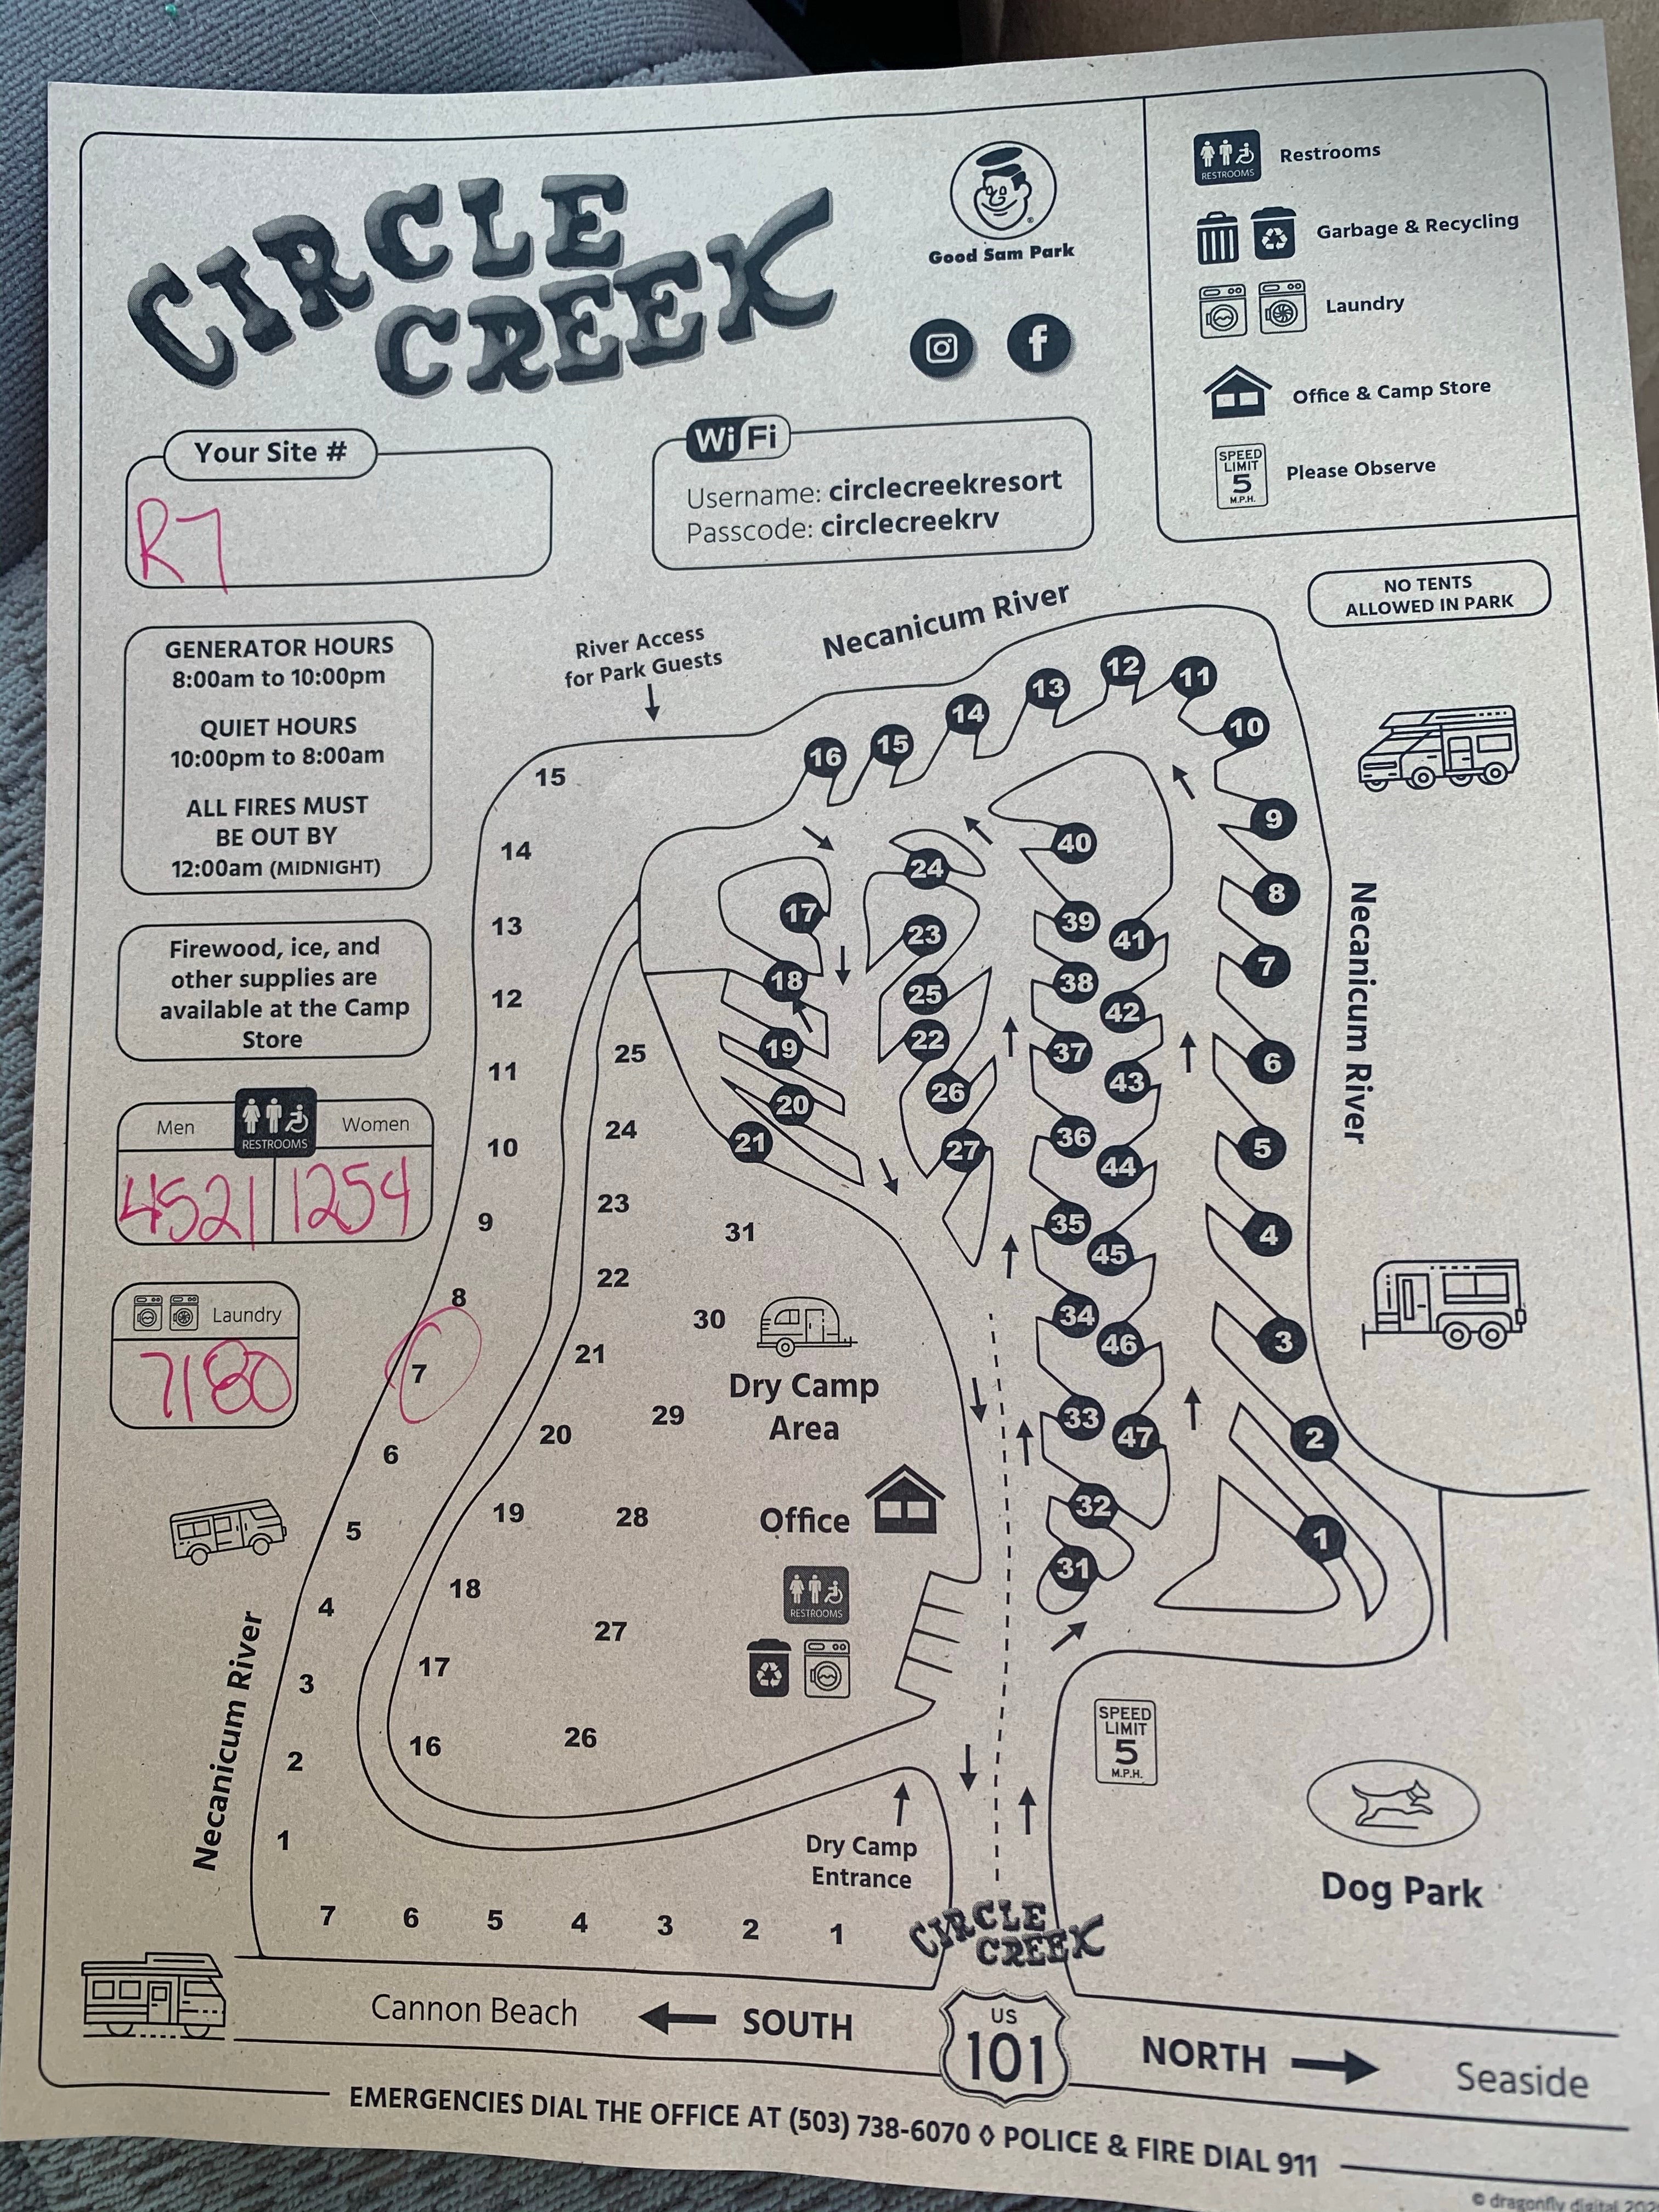 Camper submitted image from Circle Creek RV Park & Campground  - 5